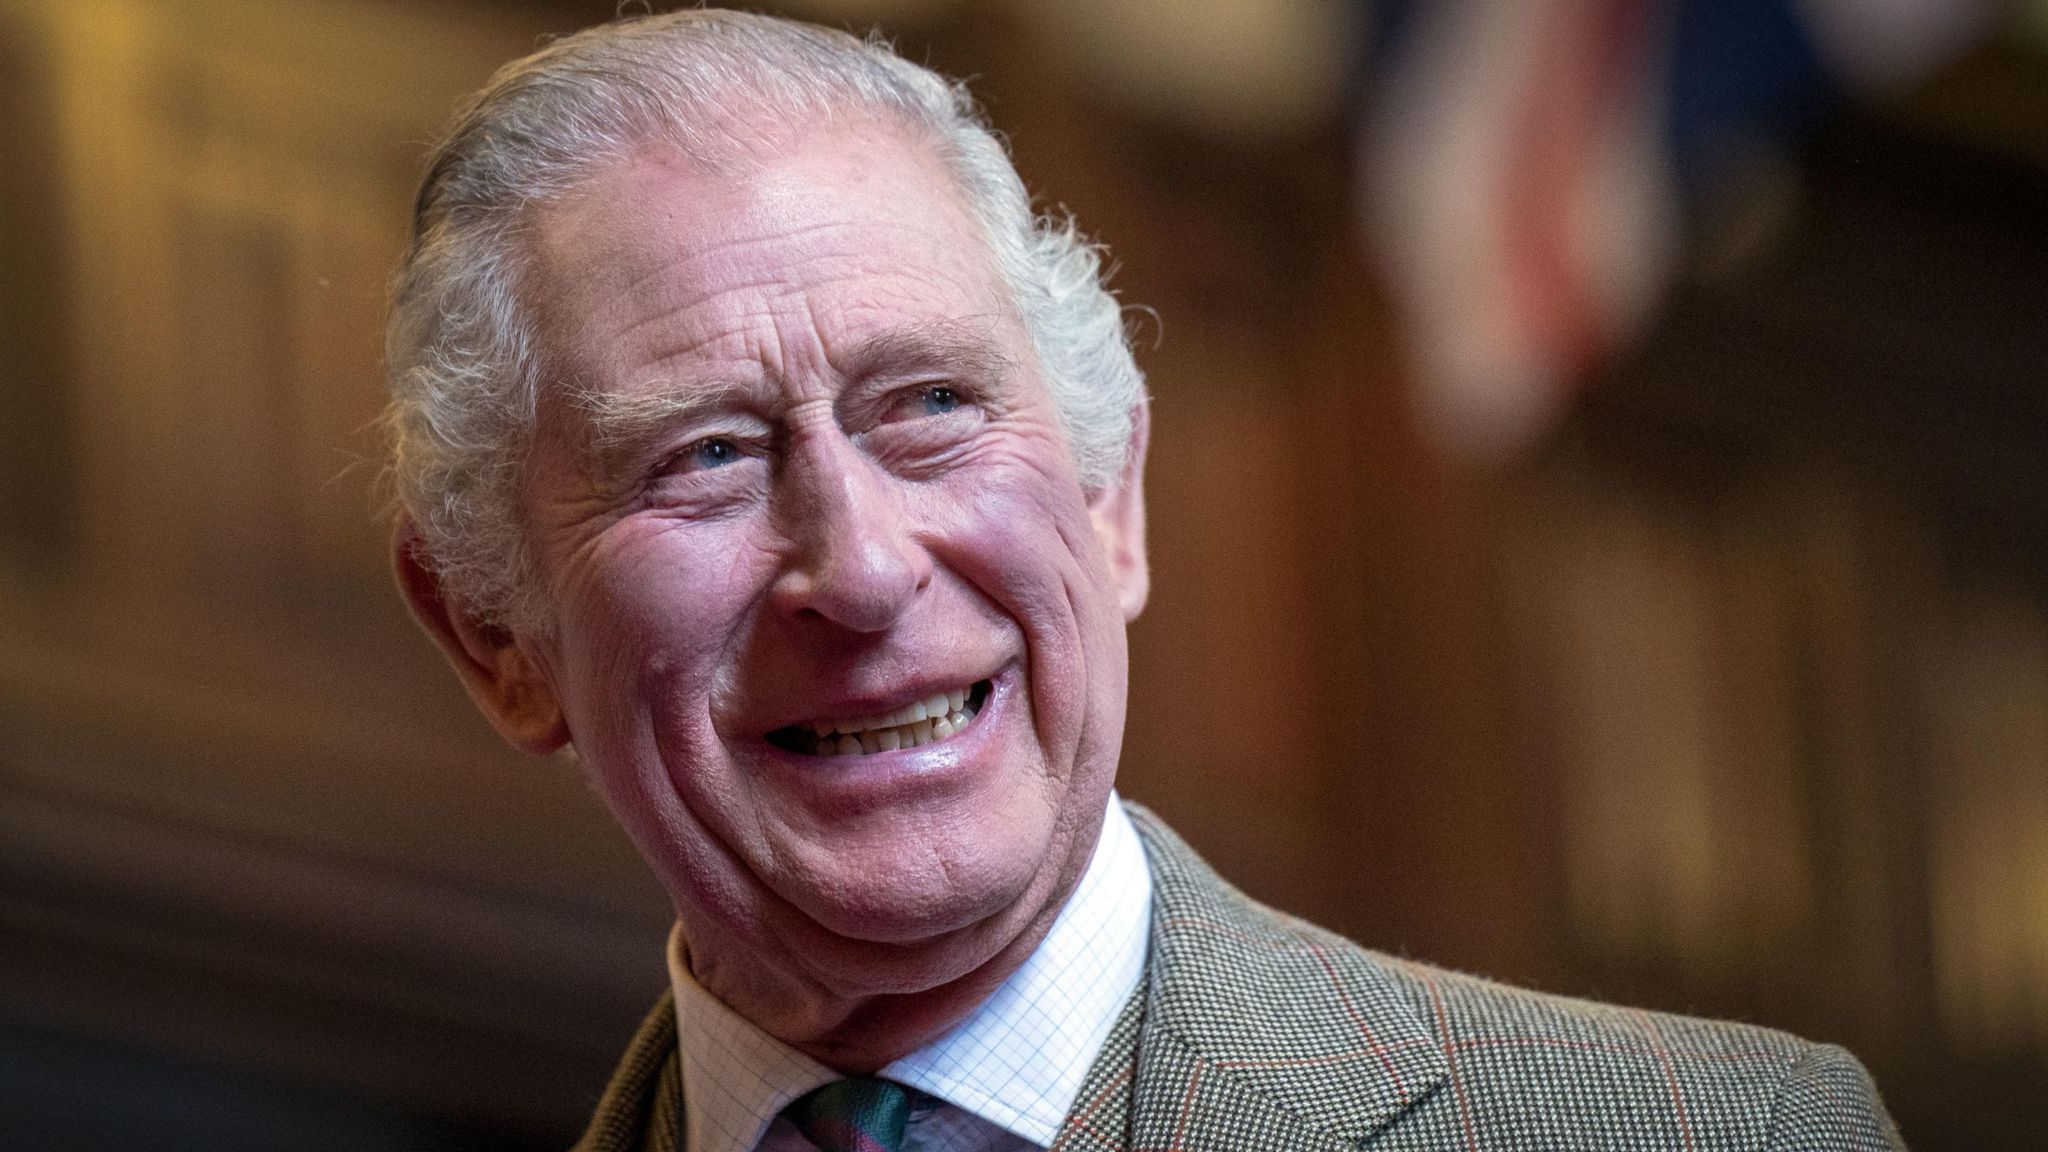 King Charles III during a visit to Aberdeen Town House to meet families who have settled in Aberdeen from Afghanistan, Syria and Ukraine. Picture date: Monday October 17, 2022.